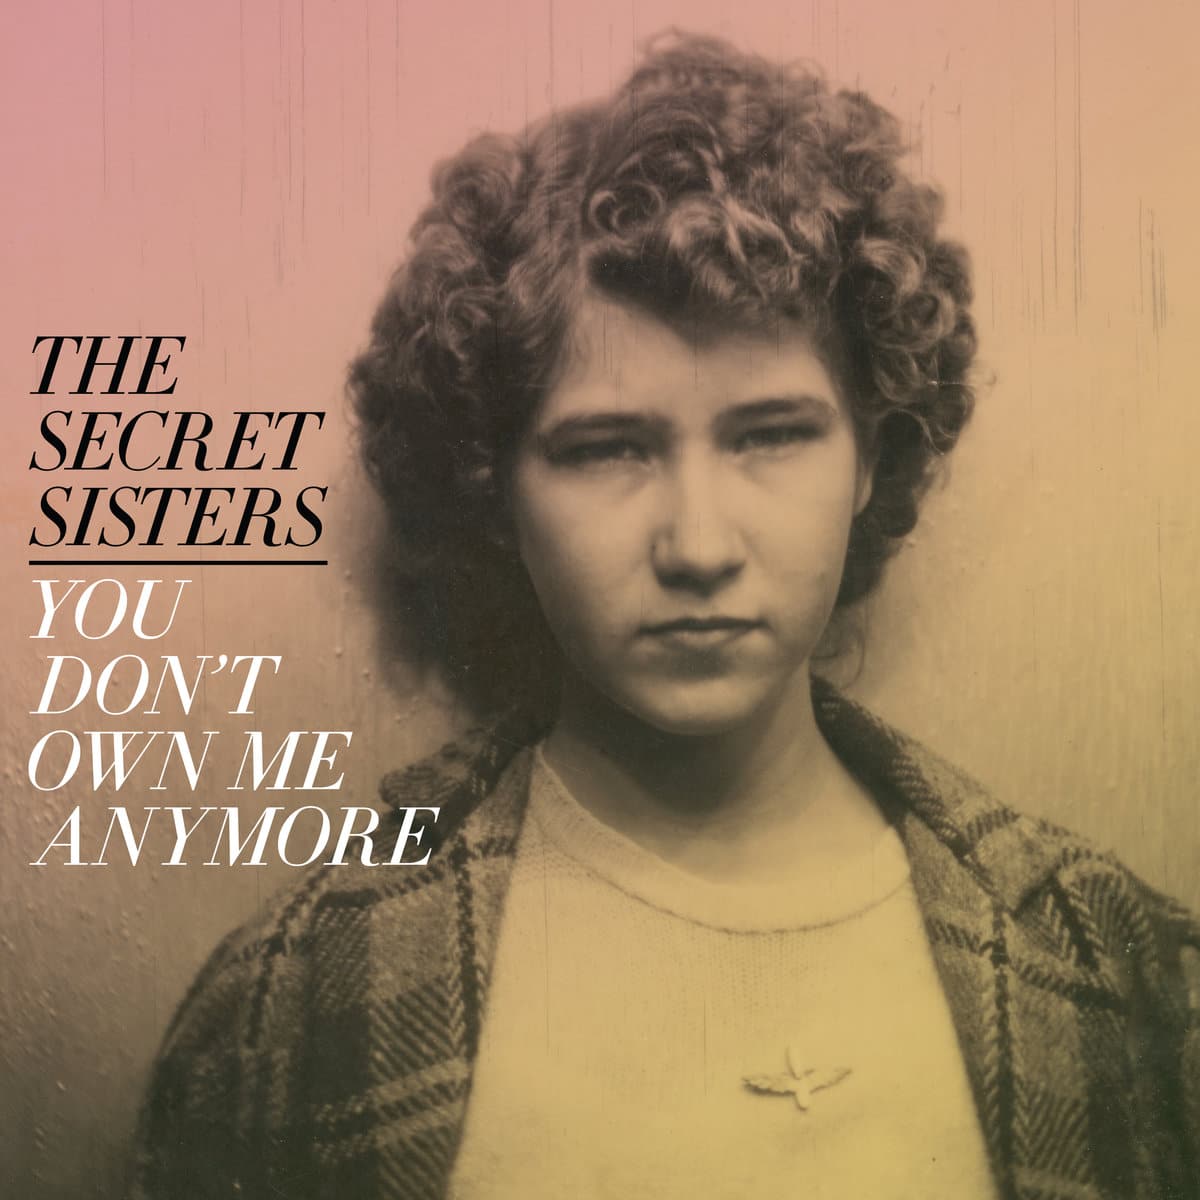 The Secret Sisters: You Don’t Own Me Anymore